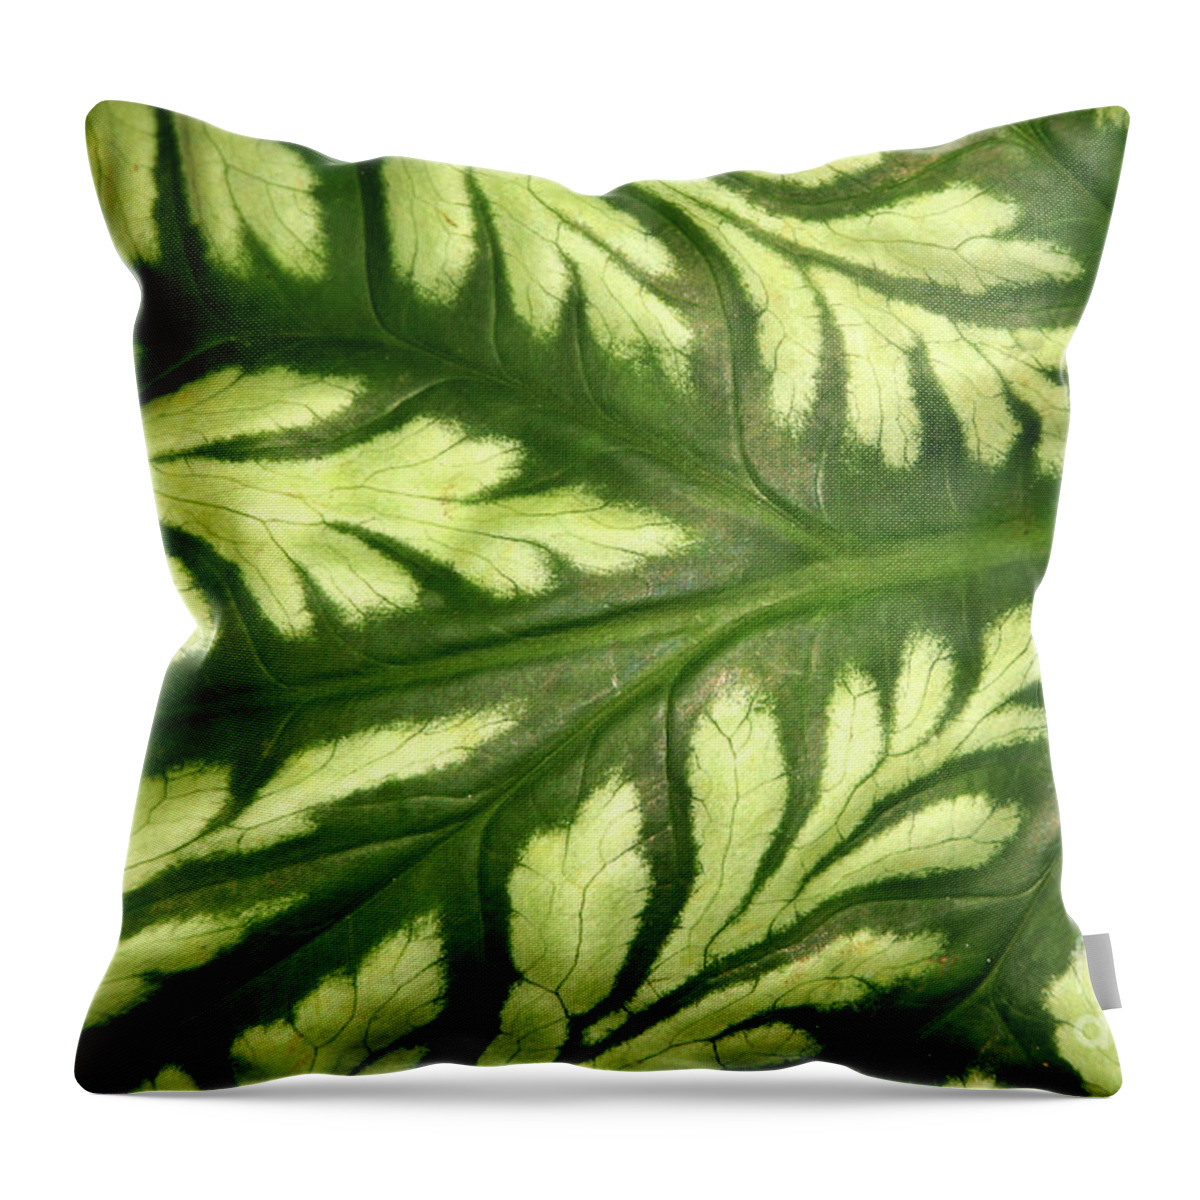 Leaf Throw Pillow featuring the photograph Nature's Design by Mariarosa Rockefeller